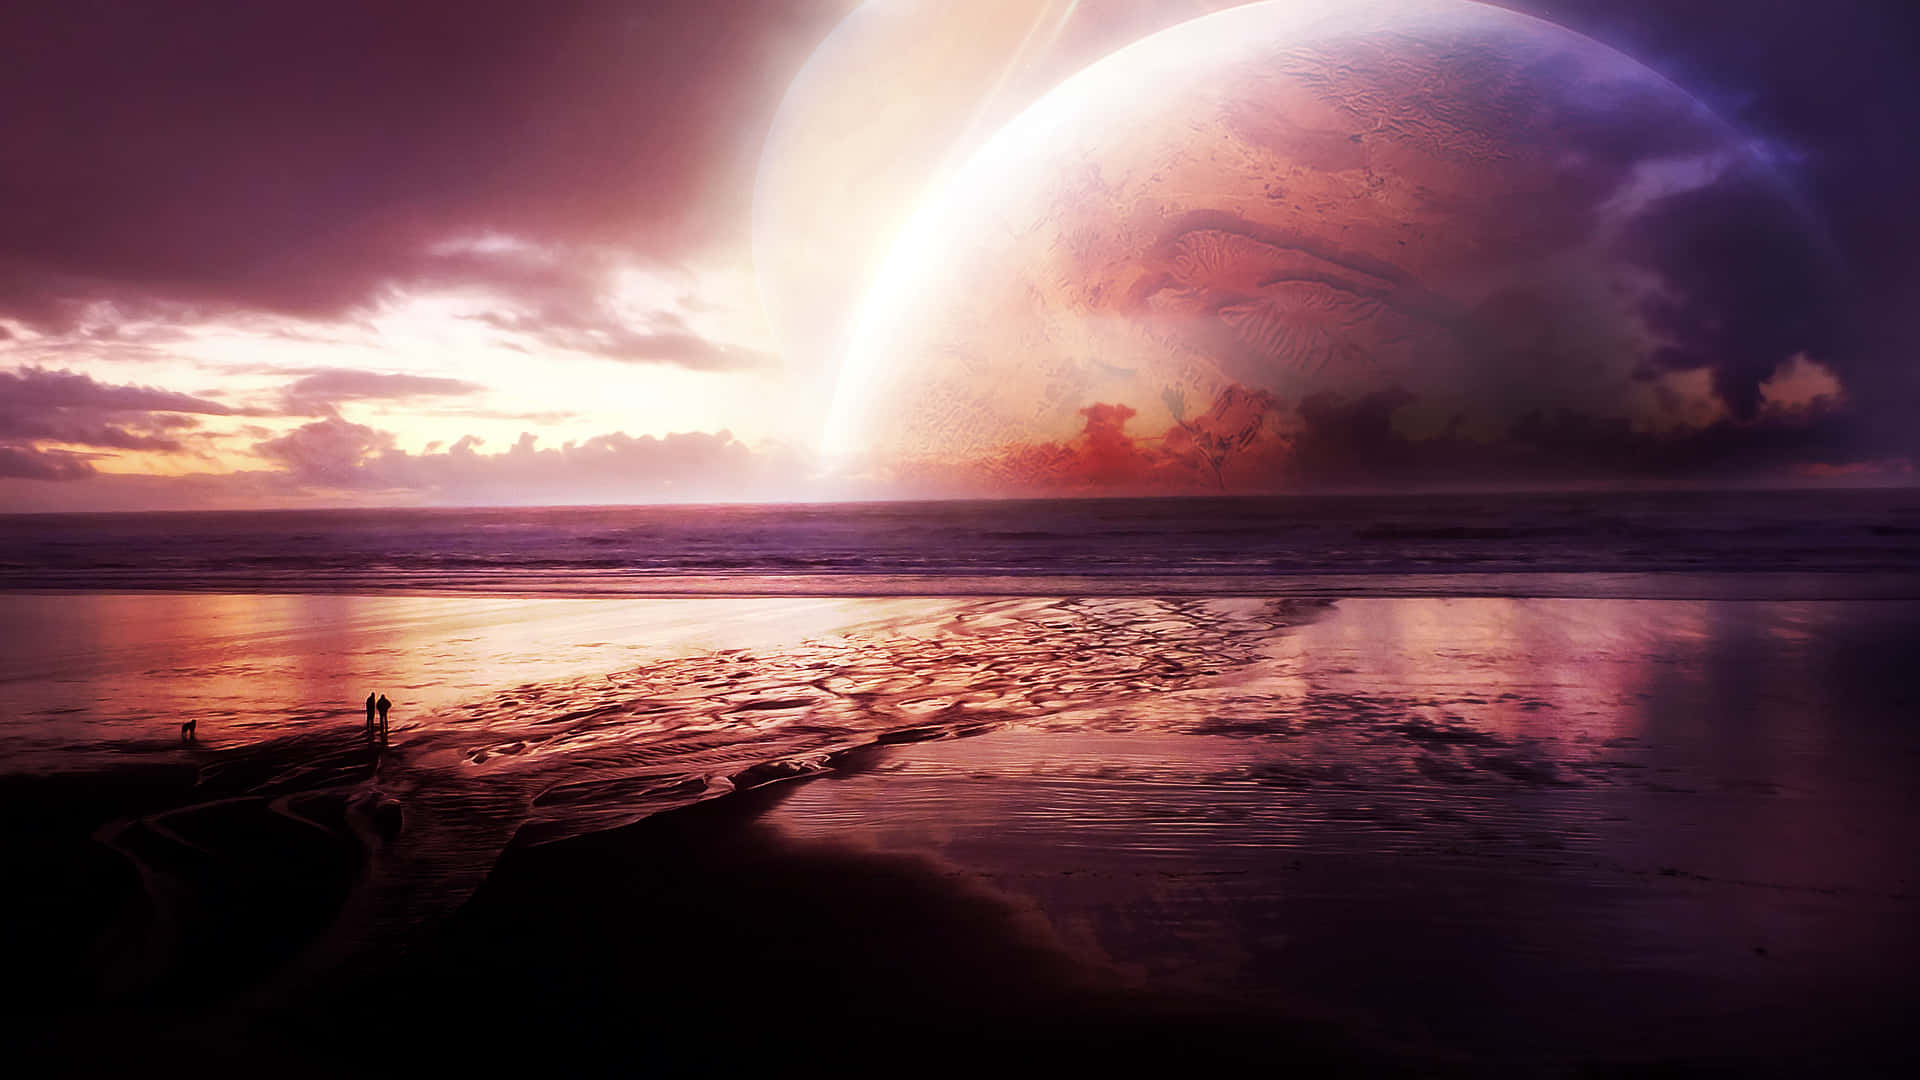 A Planet Is Seen Over The Ocean At Sunset Wallpaper